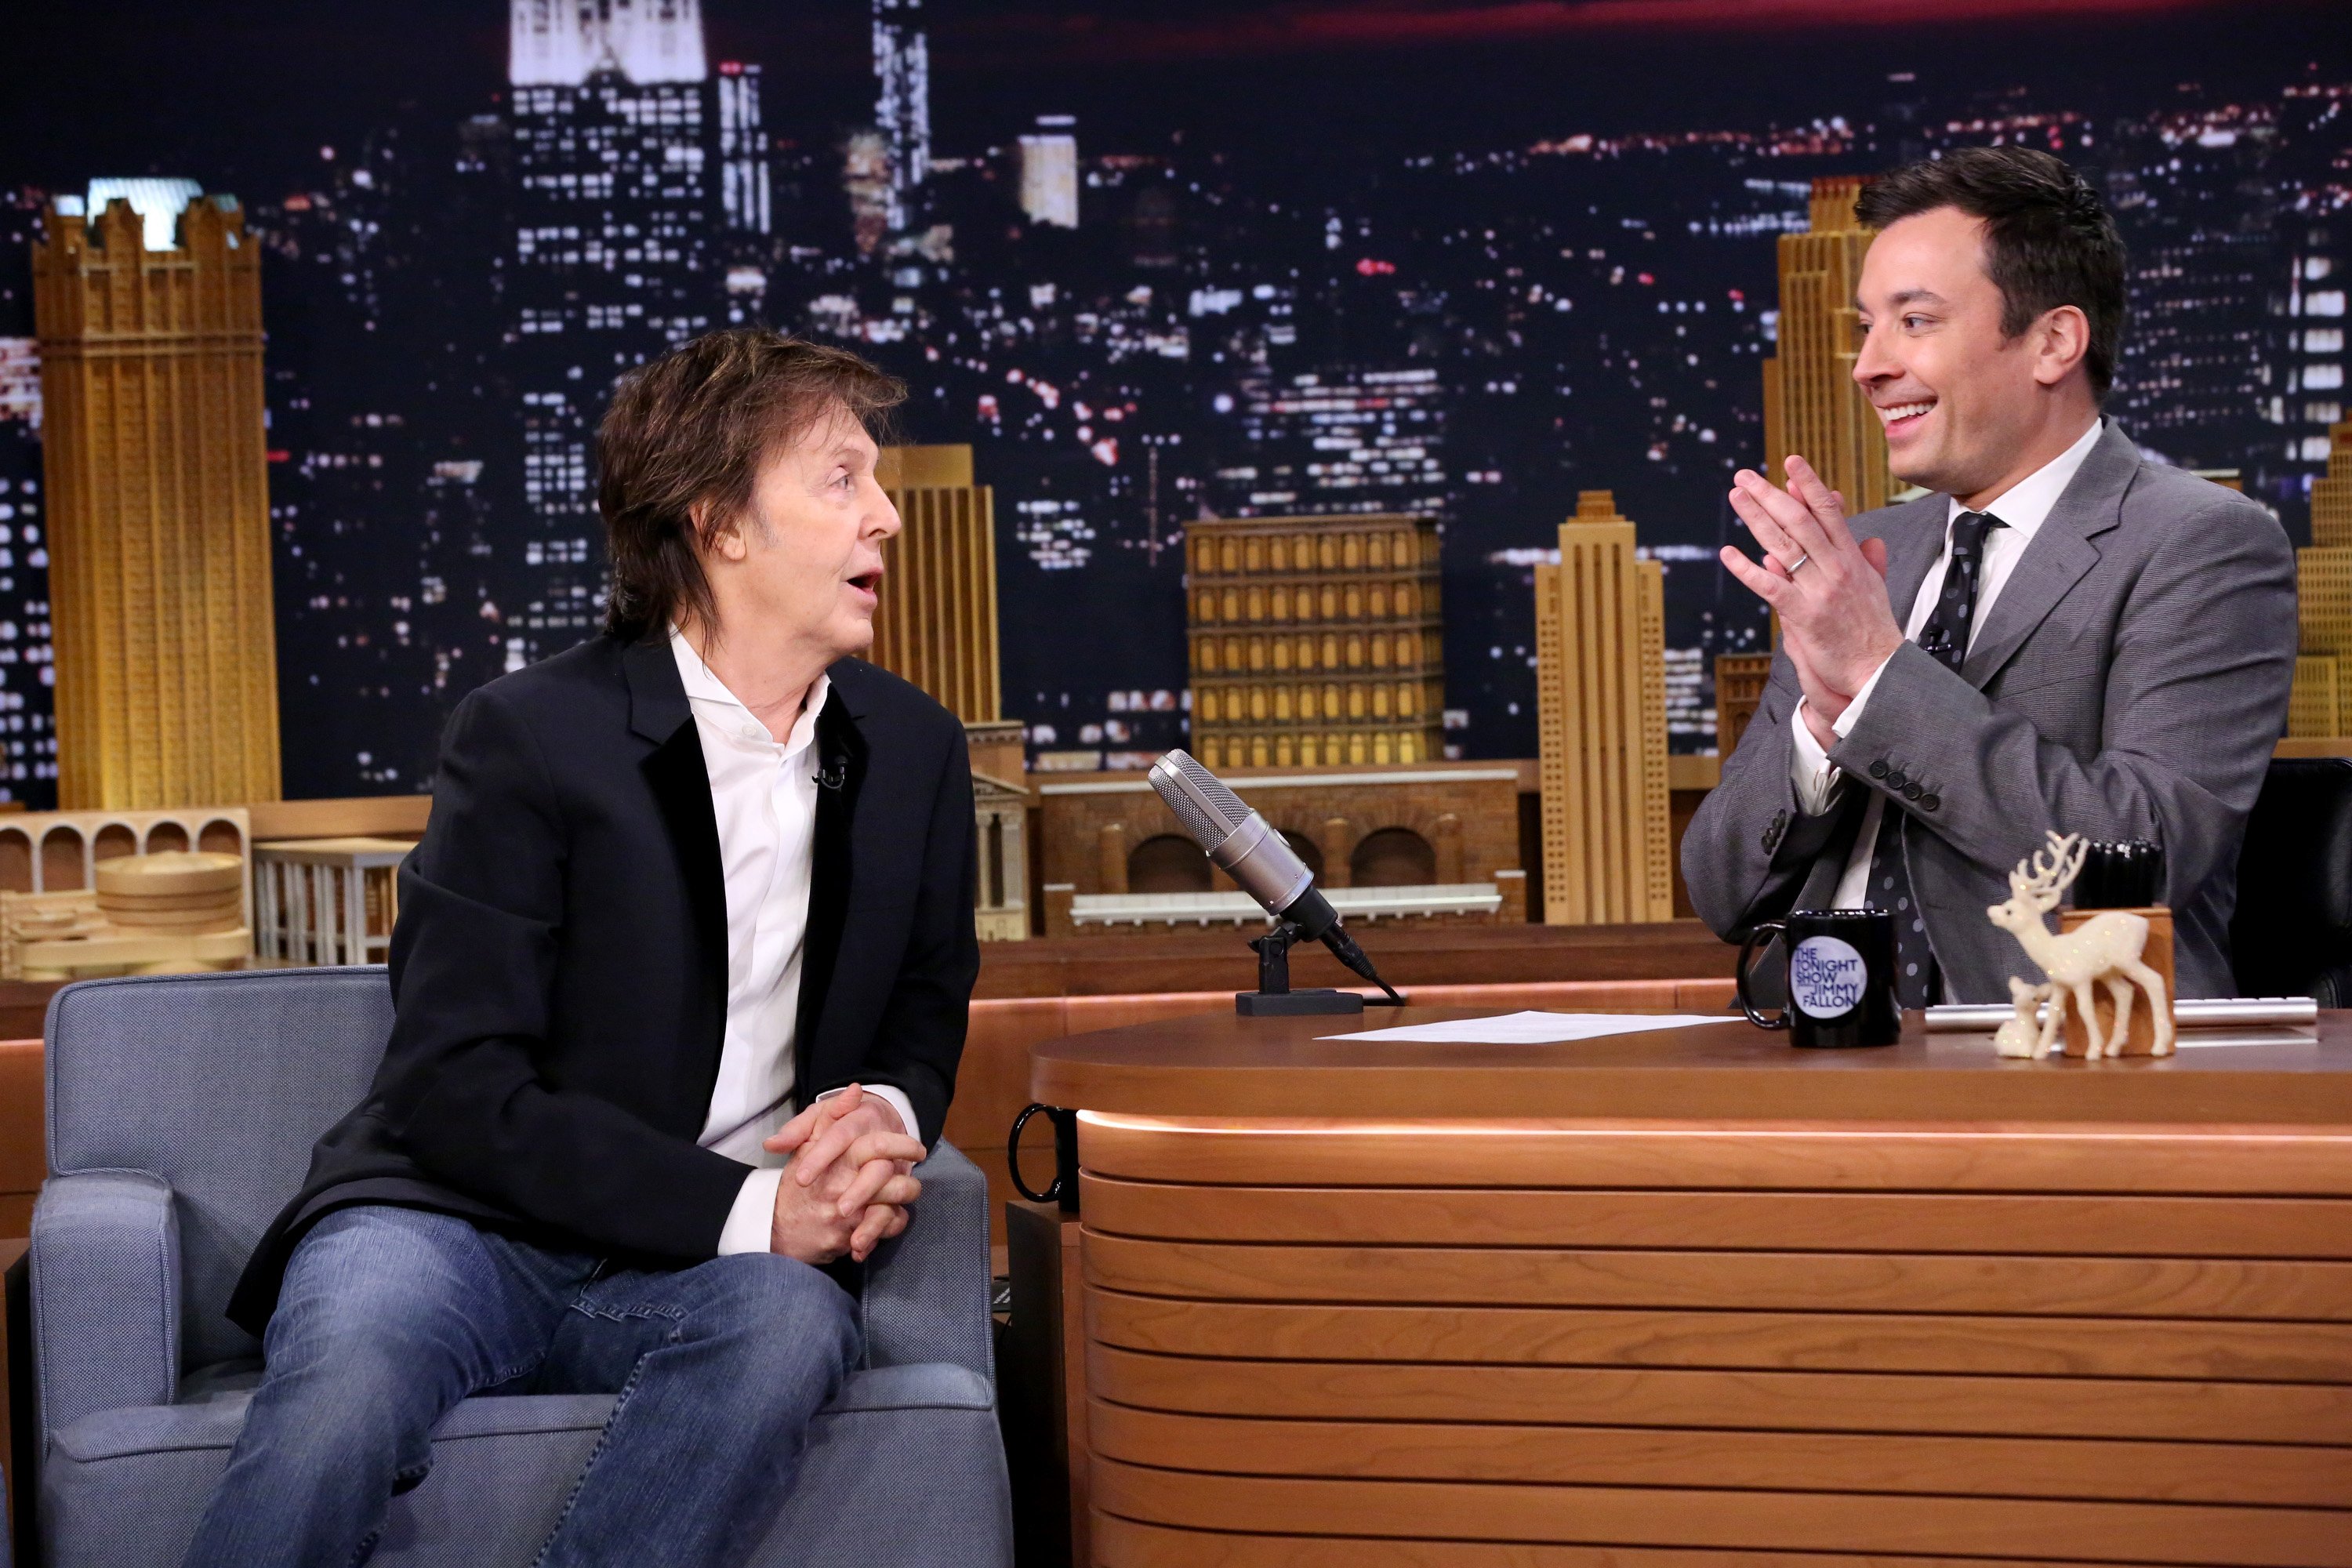 Paul McCartney appears with host Jimmy Fallon on a 2014 episode of 'The Tonight Show Starring Jimmy Fallon'